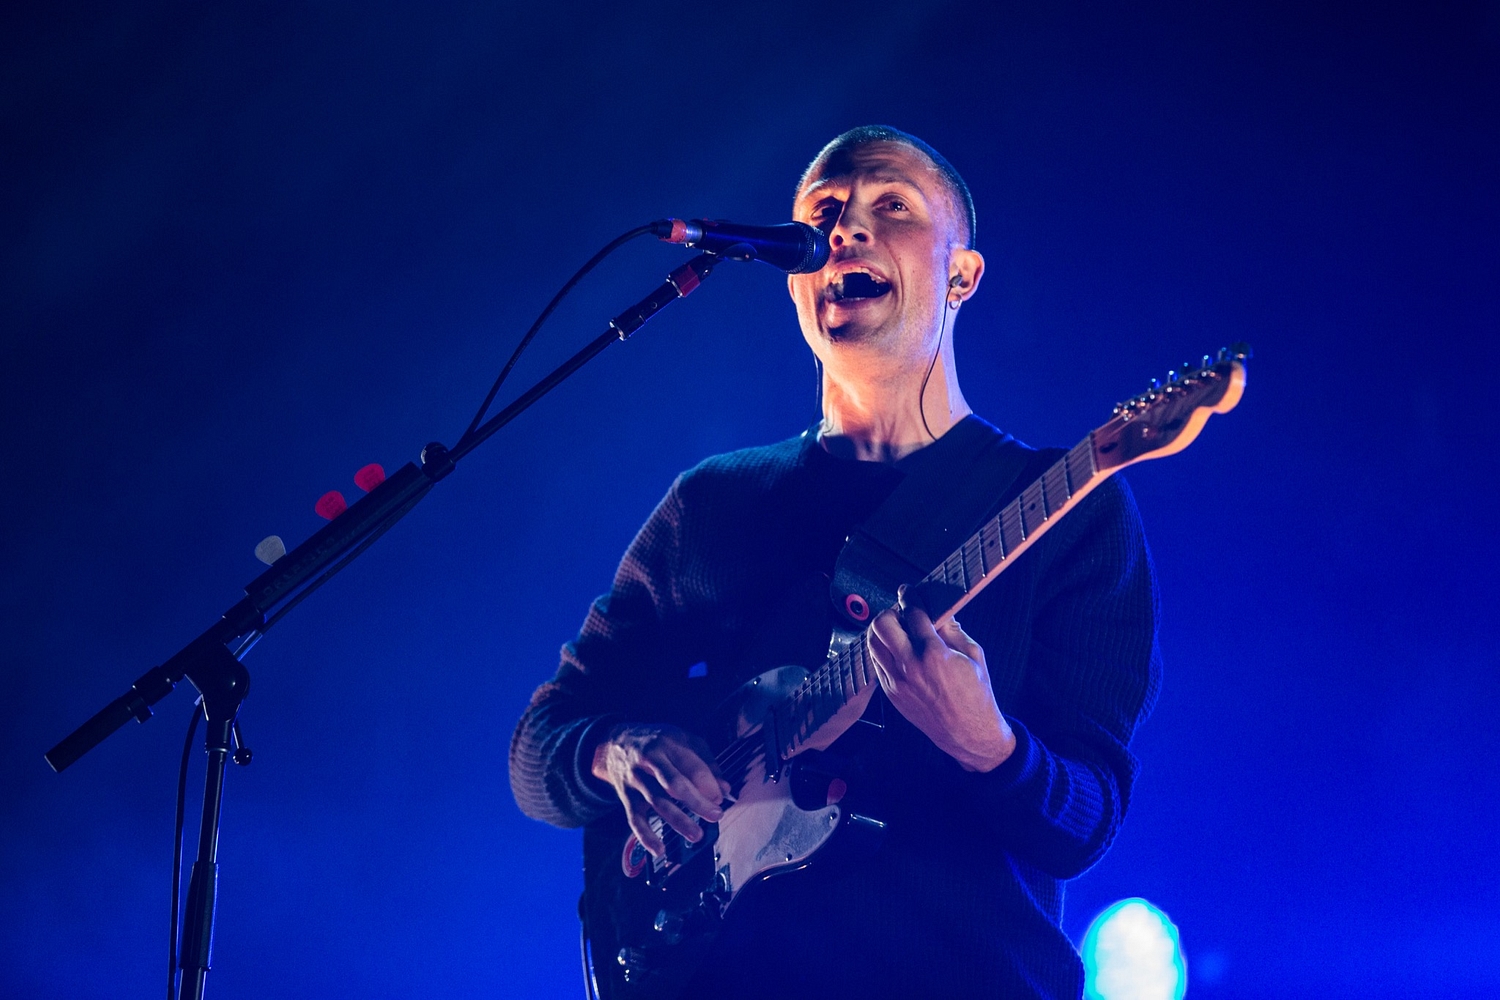 The Maccabees are set to play a charity gig at London’s Omeara